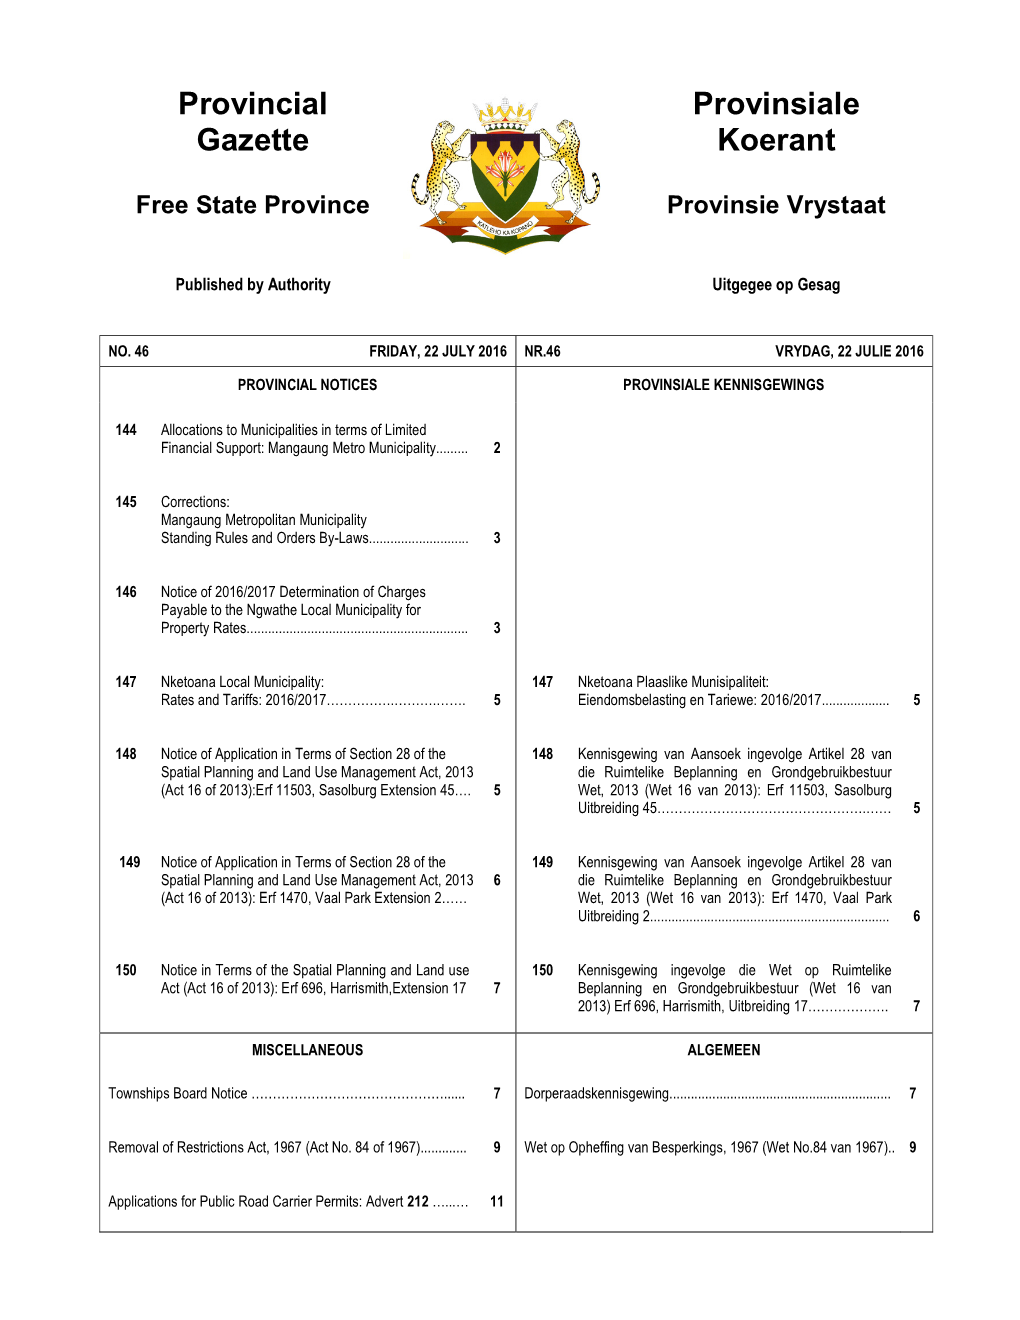 Provincial Gazette for Free State No 46 of 22-July-2016